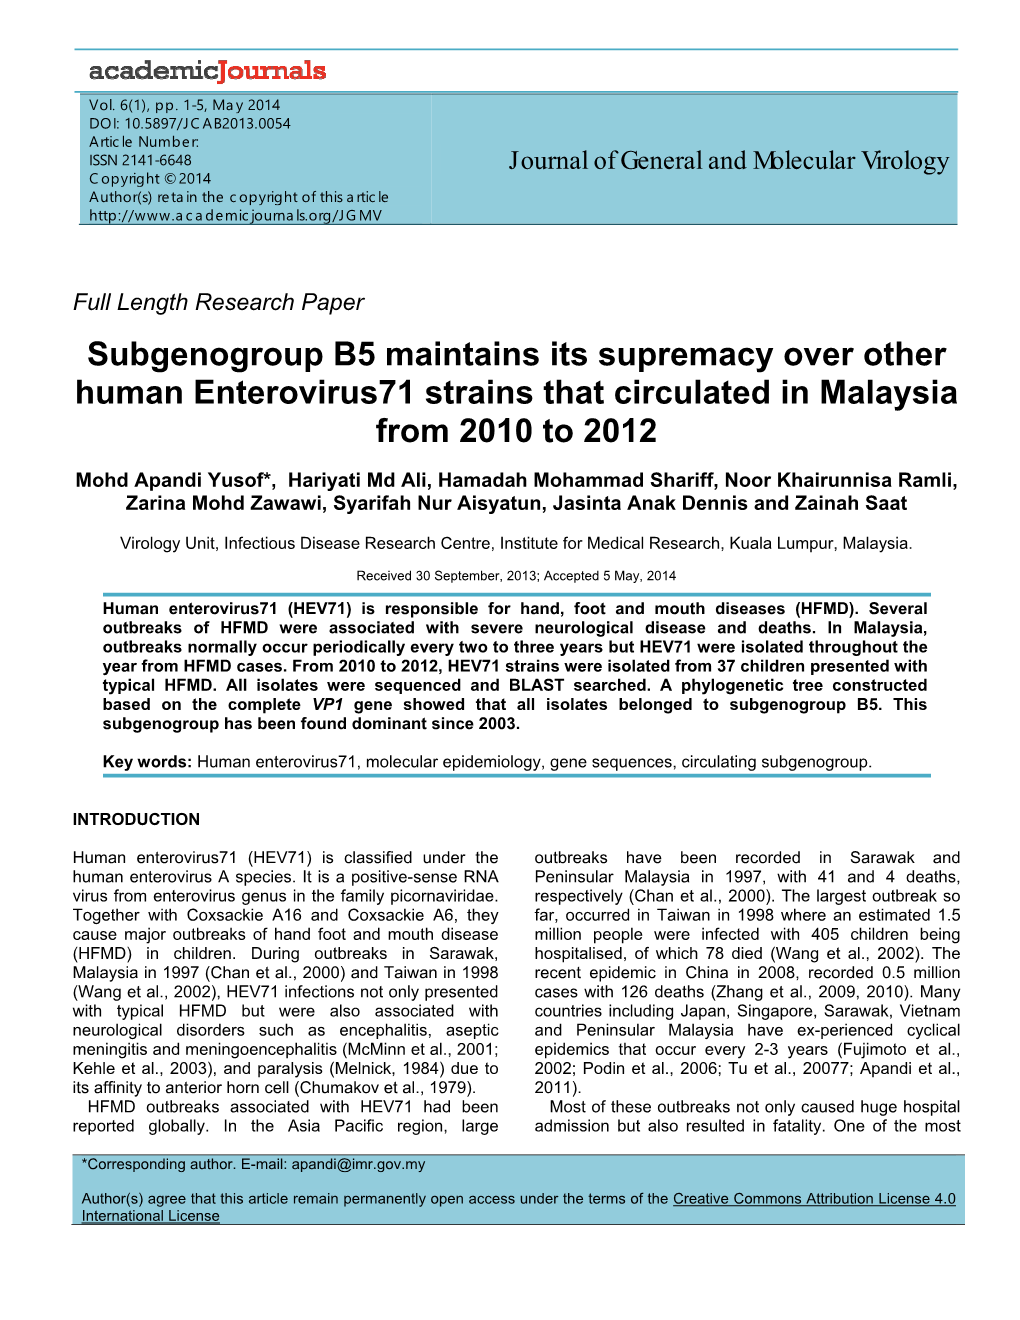 Subgenogroup B5 Maintains Its Supremacy Over Other Human Enterovirus71 Strains That Circulated in Malaysia from 2010 to 2012